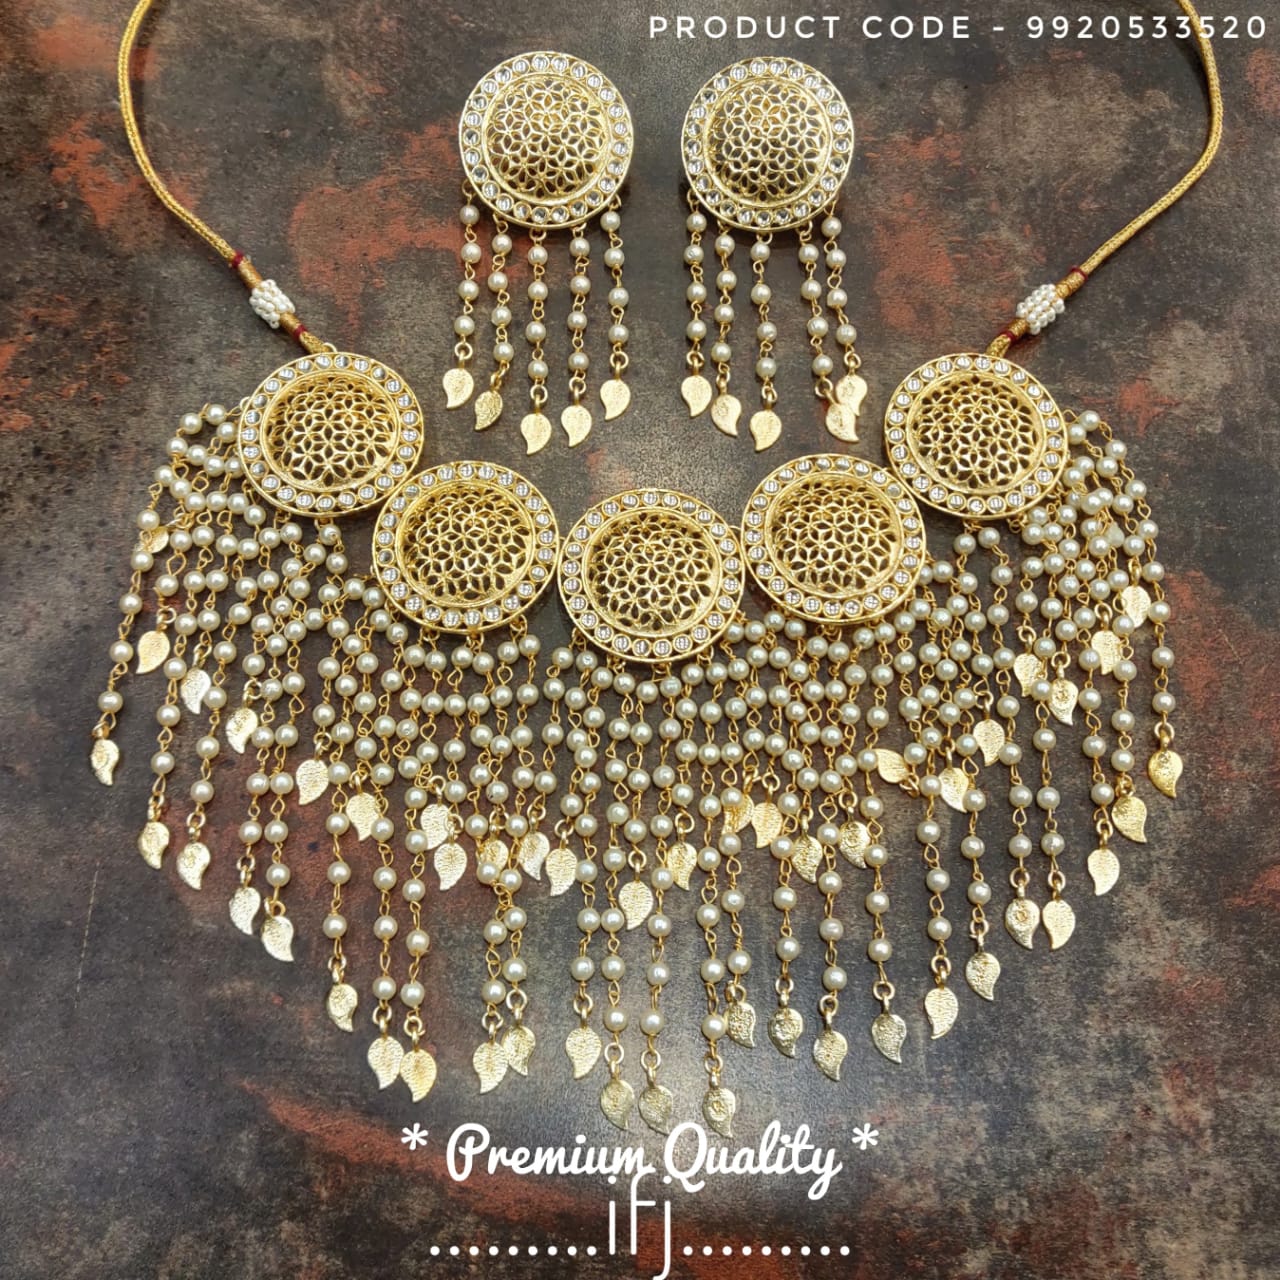 Gold Pearl Necklaces - Custom Made in Sydney | Aquarian Pearls